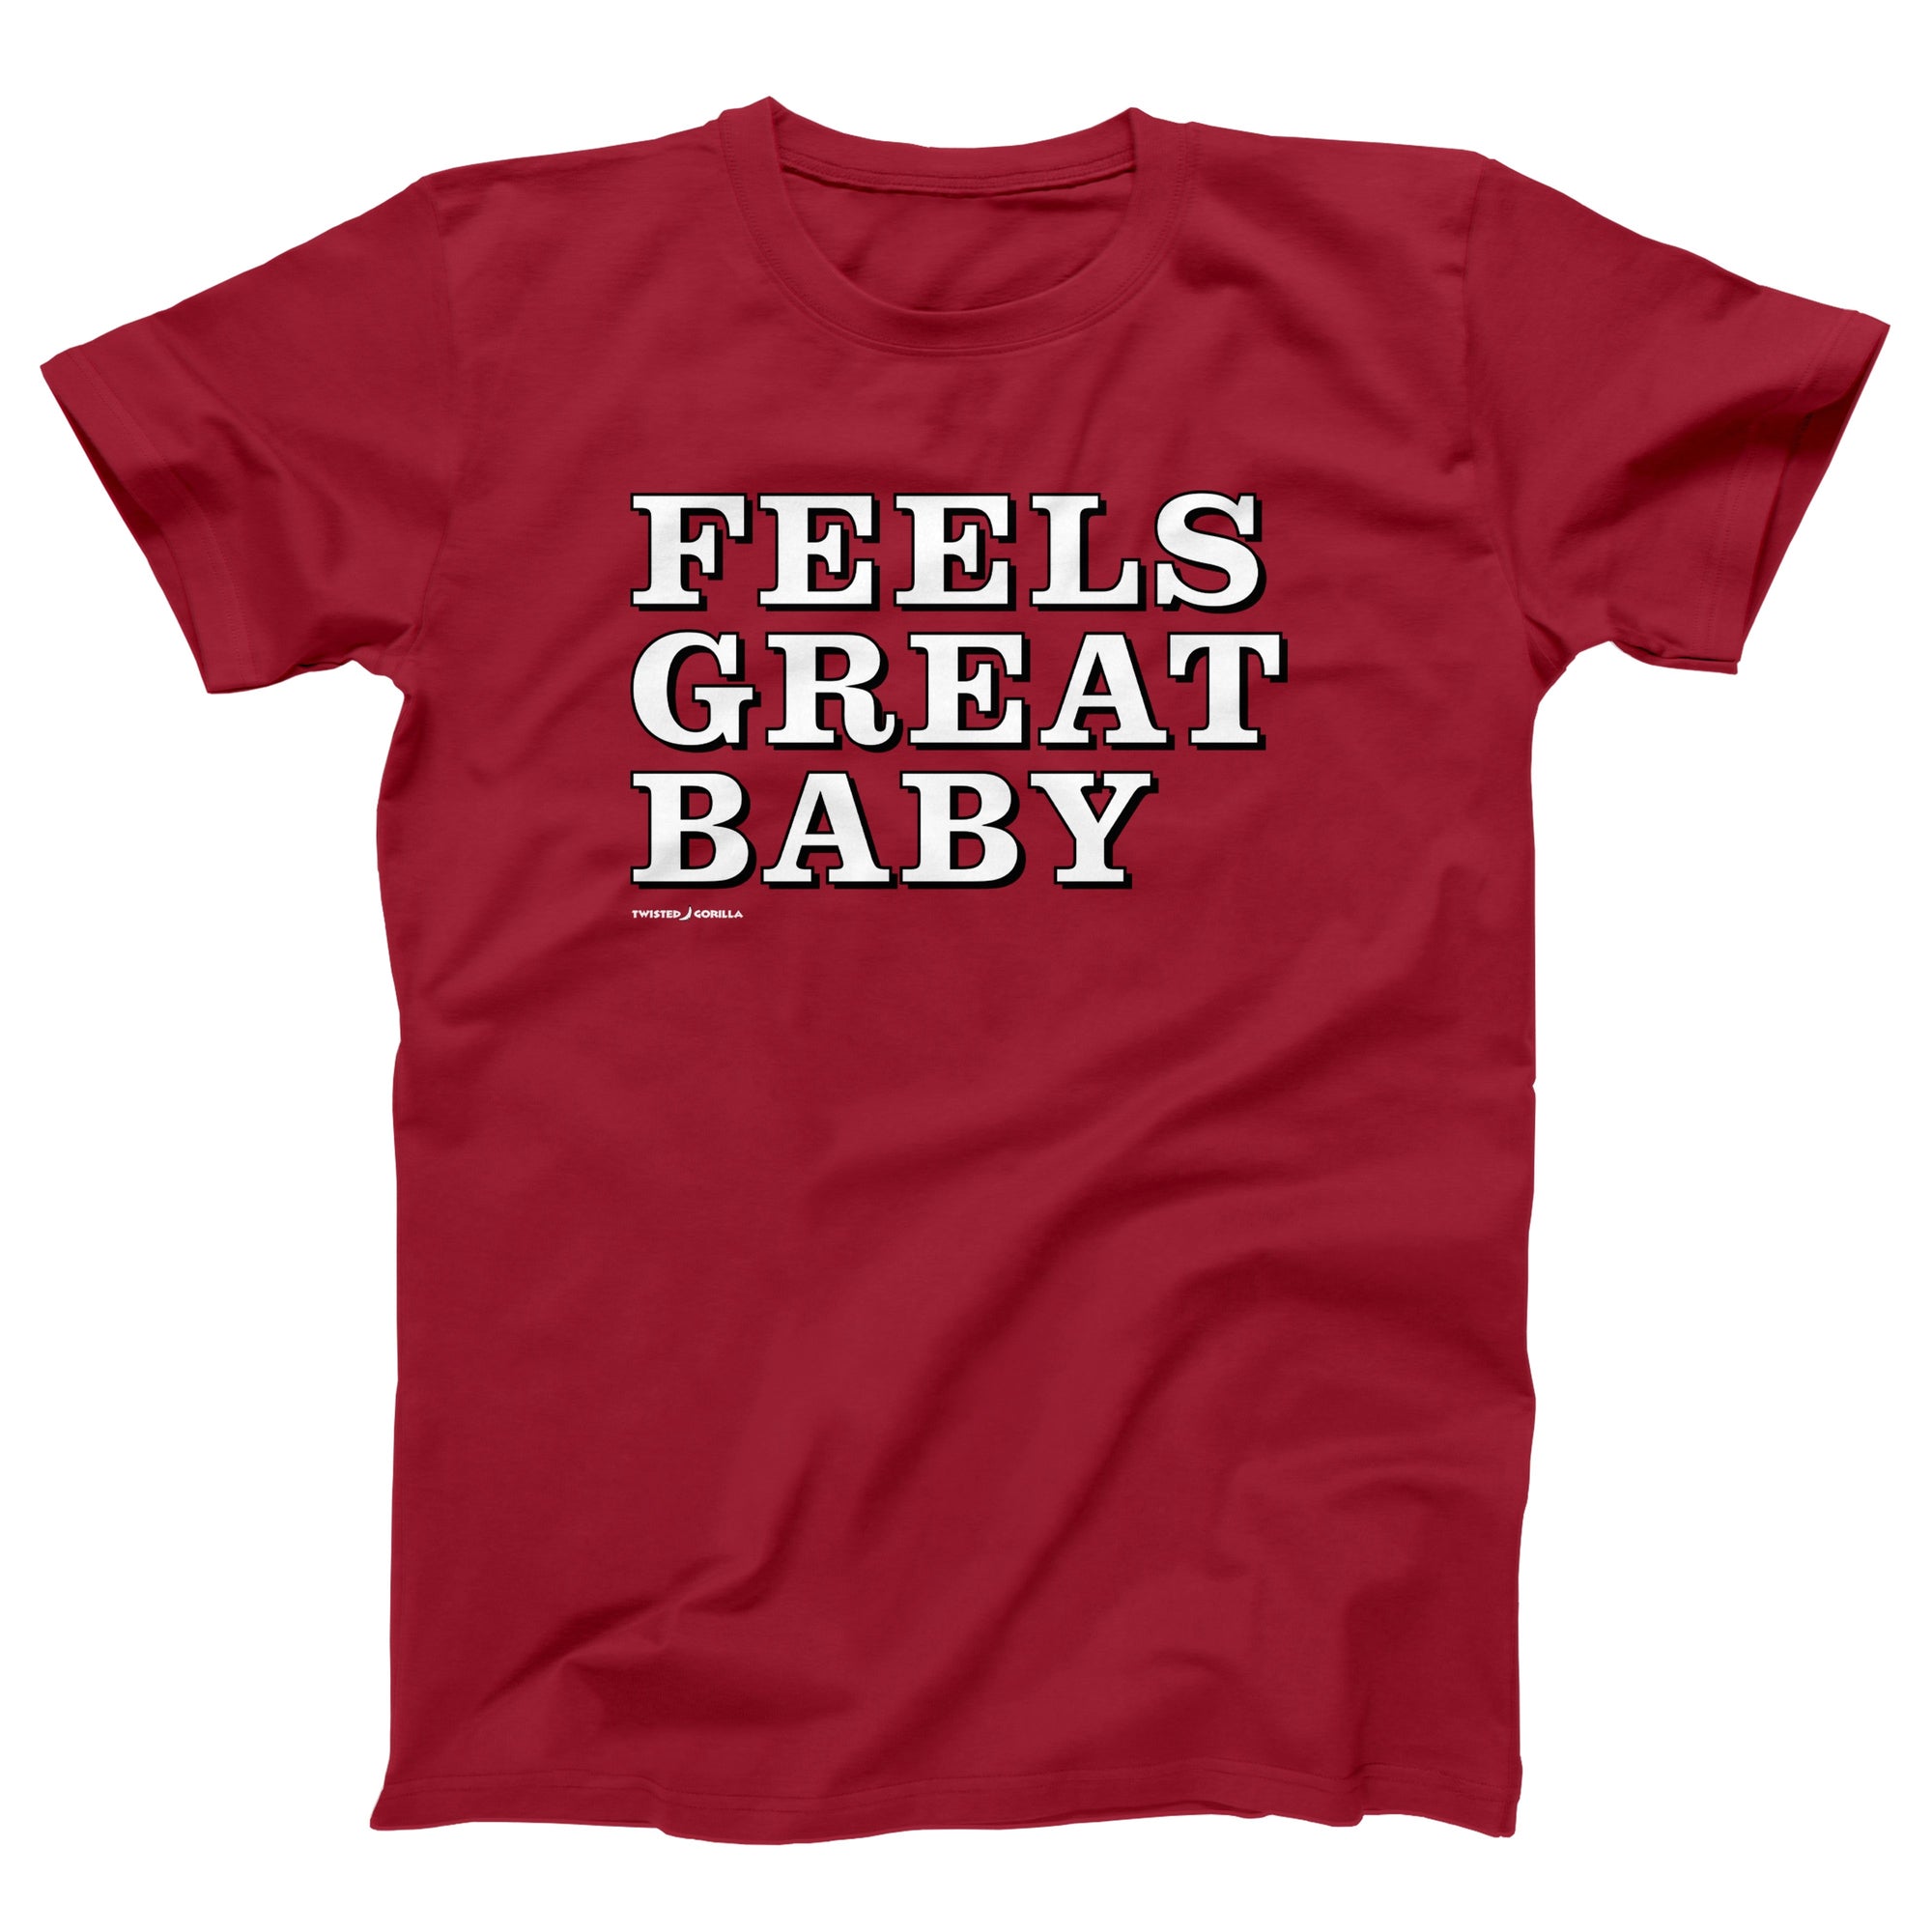 Feels Great Baby Adult Unisex T-Shirt - Twisted Gorilla